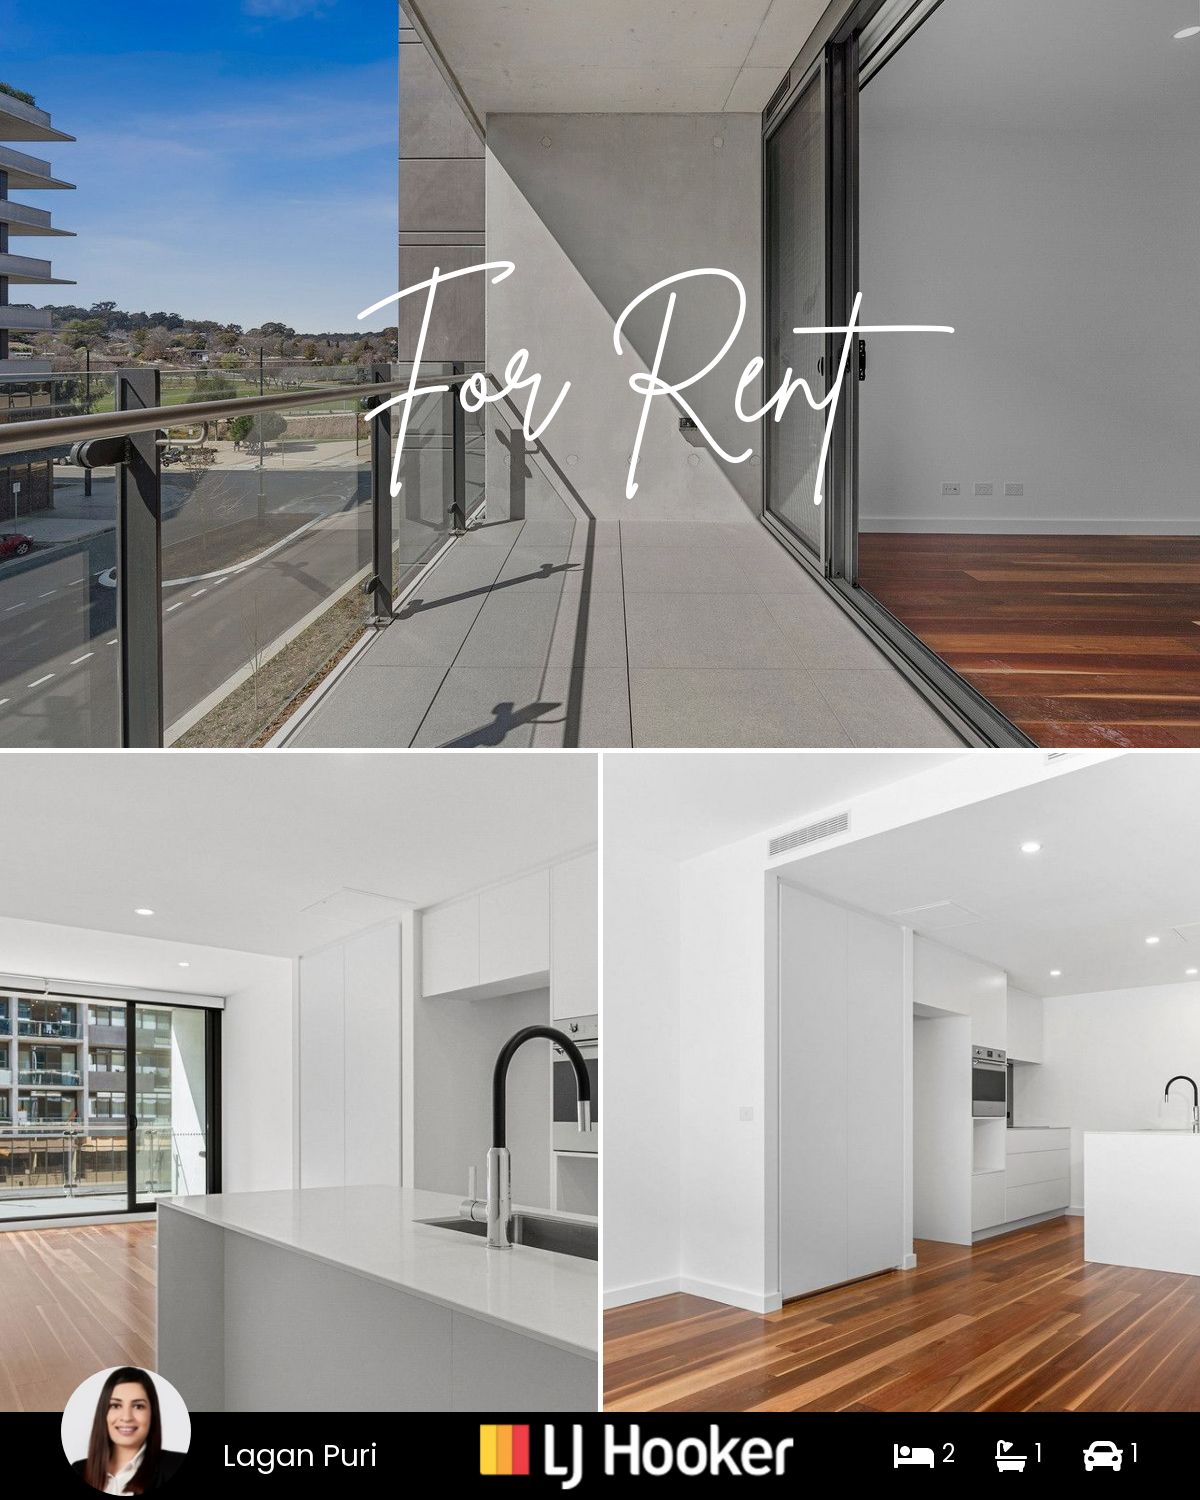 207/4 Anzac Park, Campbell, ACT 2612 | Realty.com.au